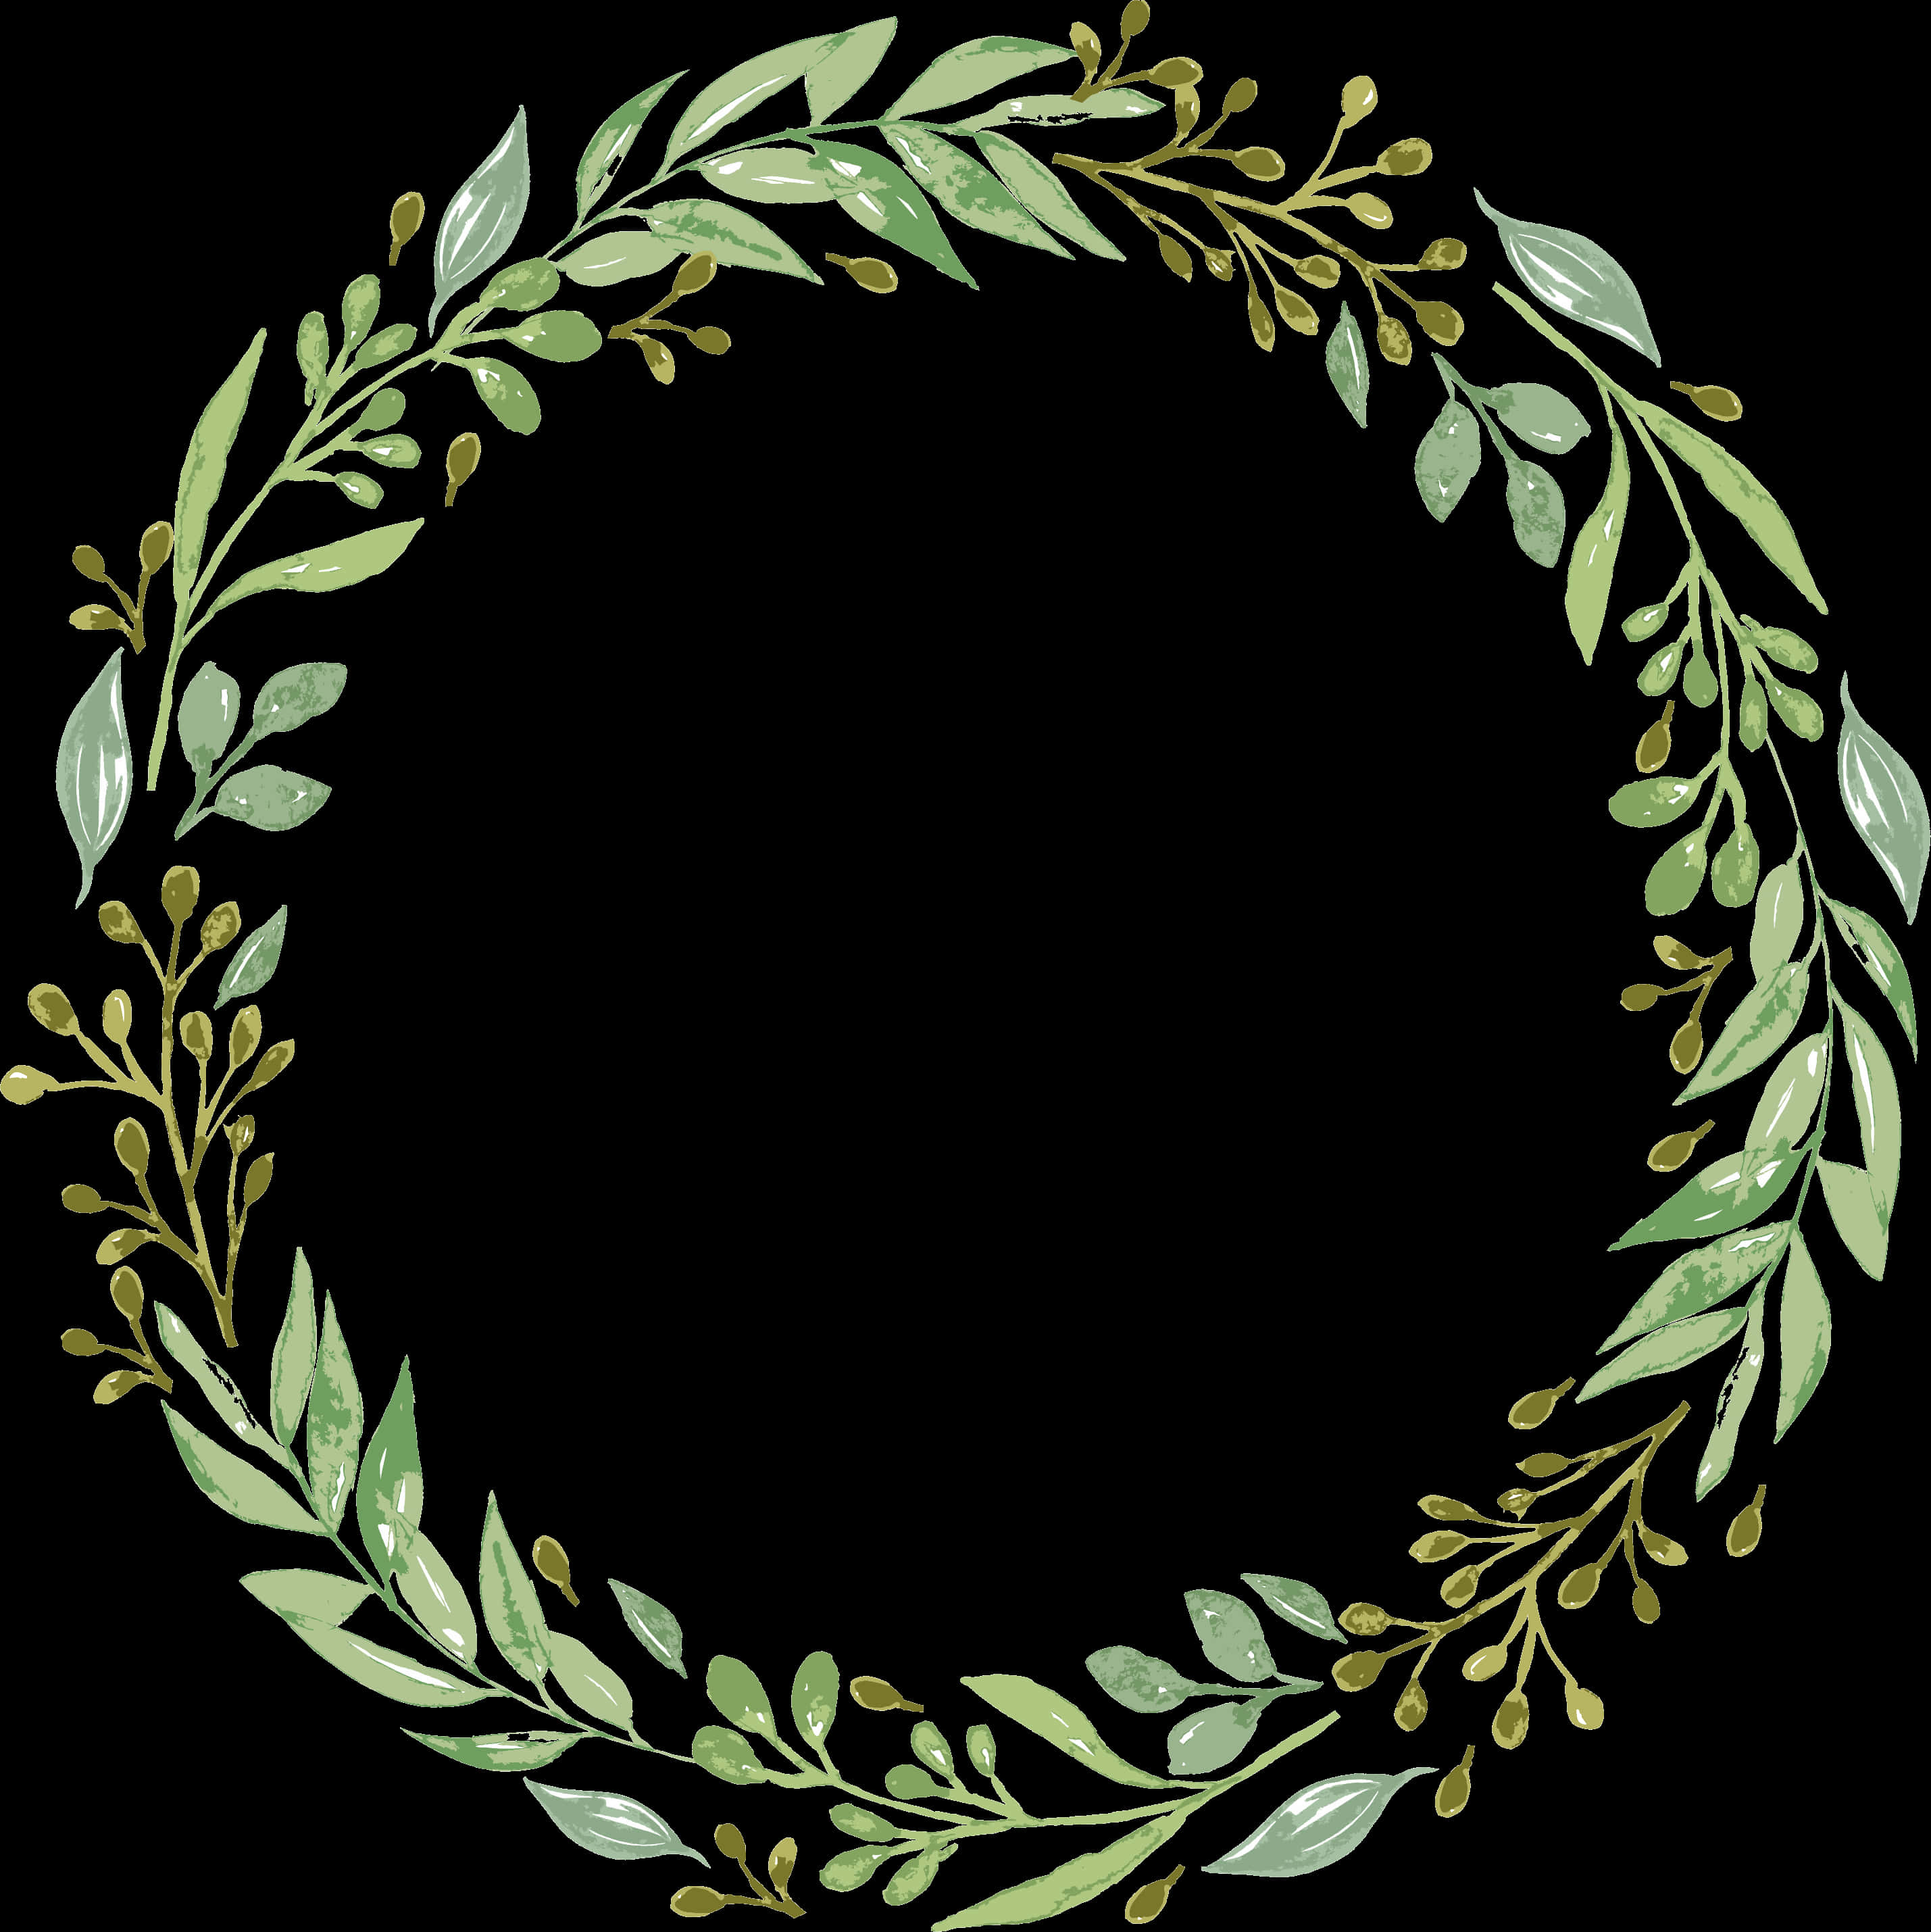 A Circle Of Leaves And Branches